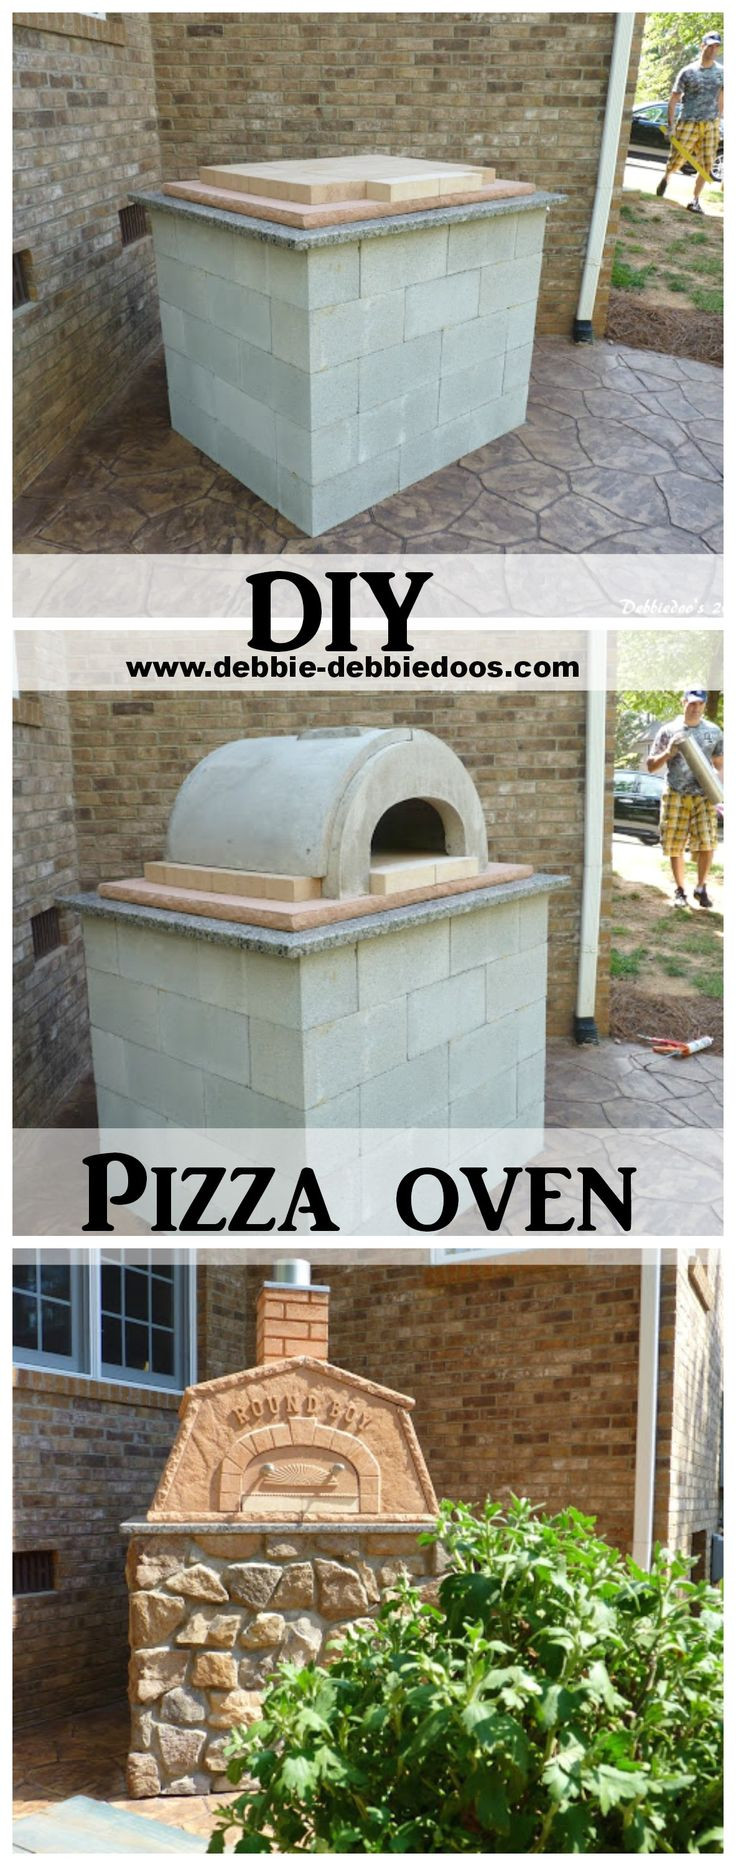 DIY Outdoor Pizza Oven
 Make your own outdoor pizza oven DIY pizza oven tutorial